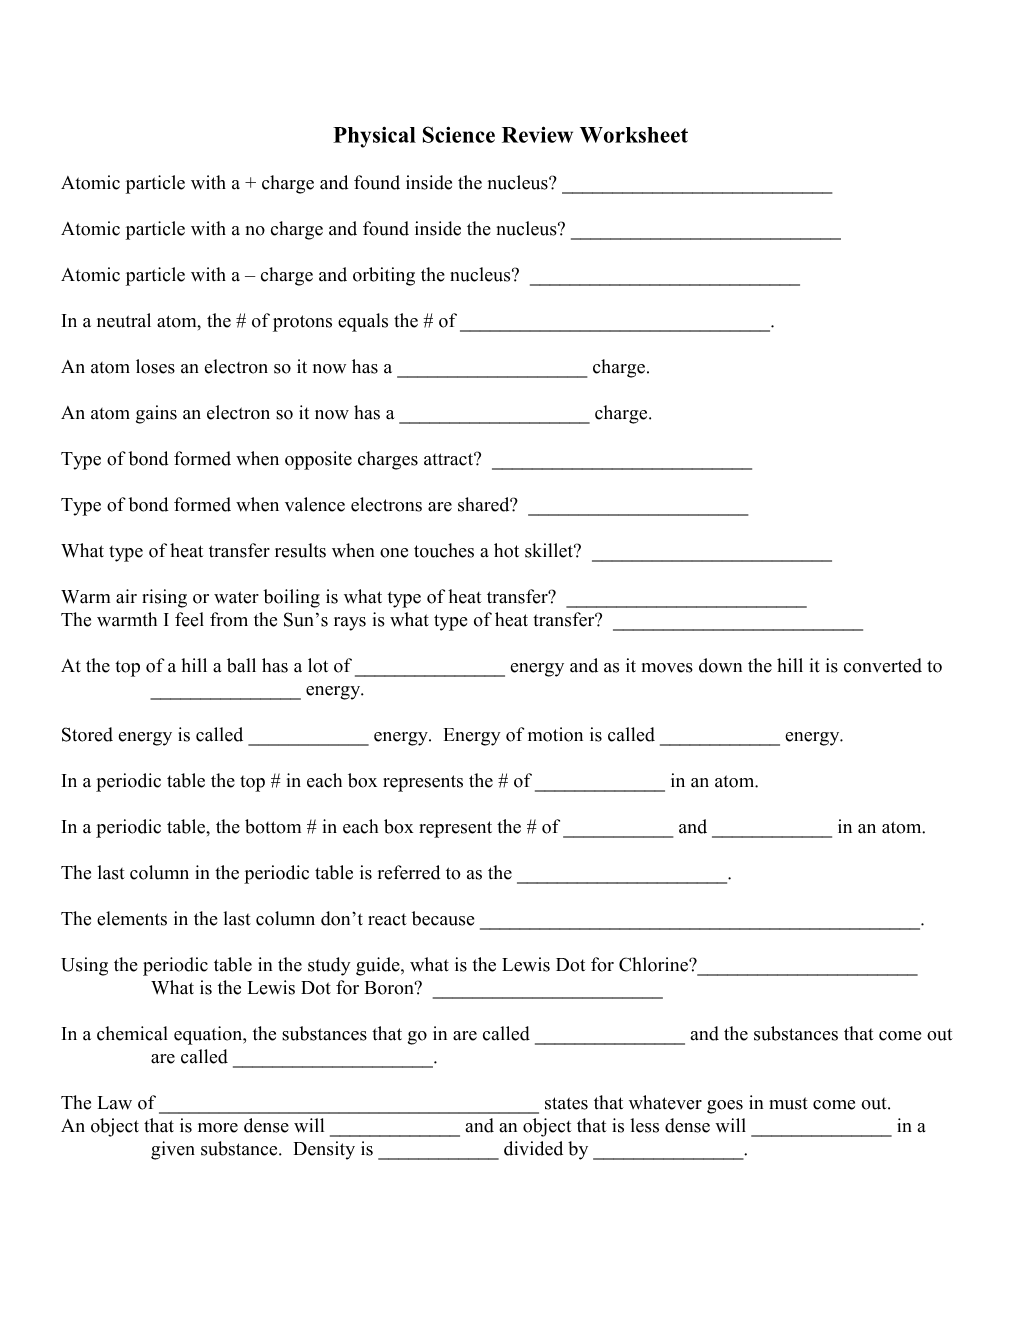 Physical Science Review Worksheet s1